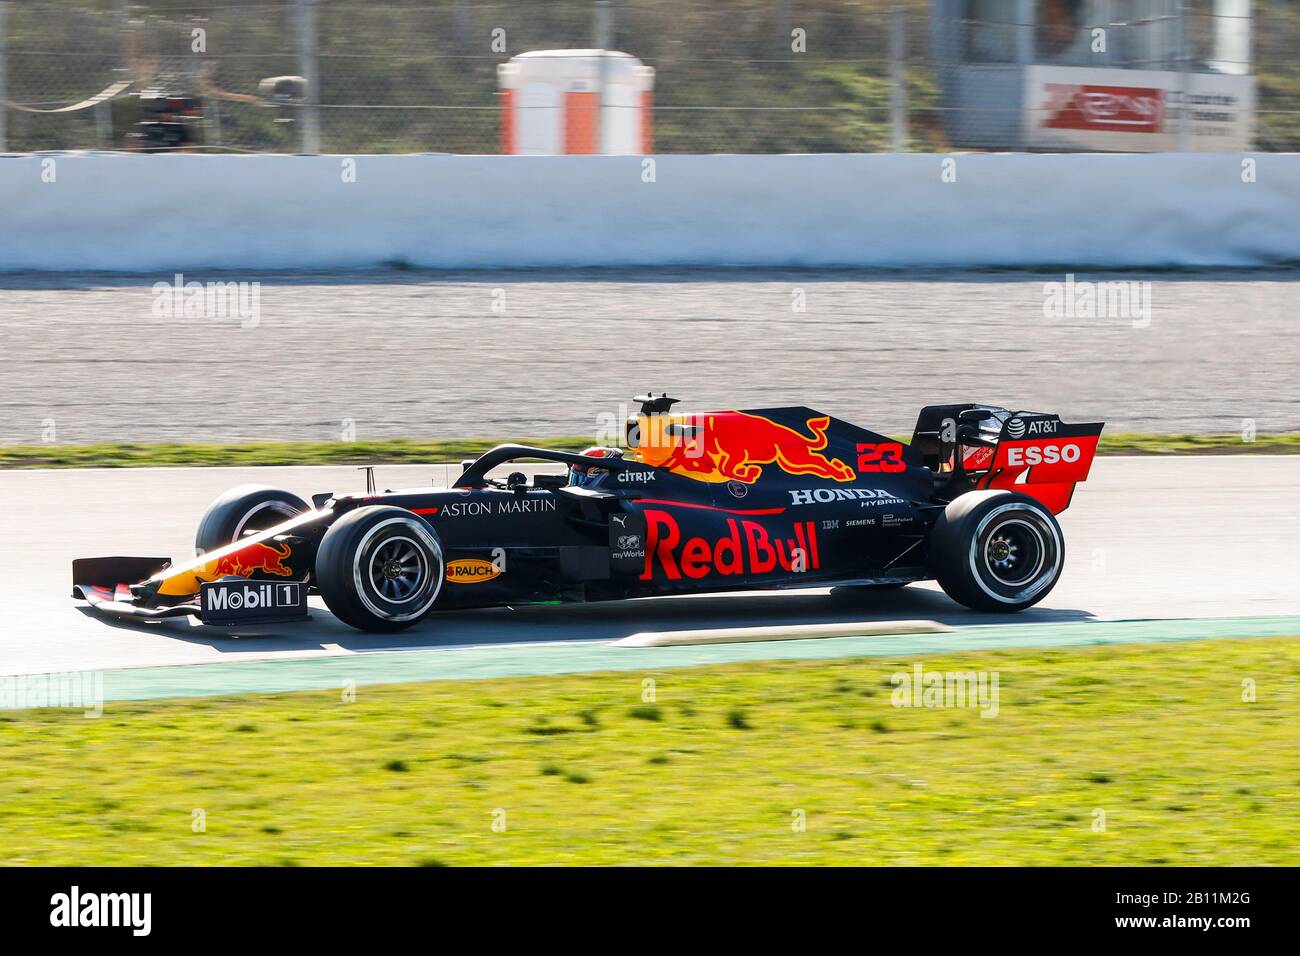 Alexander Albon driving for Red Bull team at F1 Winter Testing at Monmelo circuit, Barcelona, Spain on 21.2.20 Stock Photo